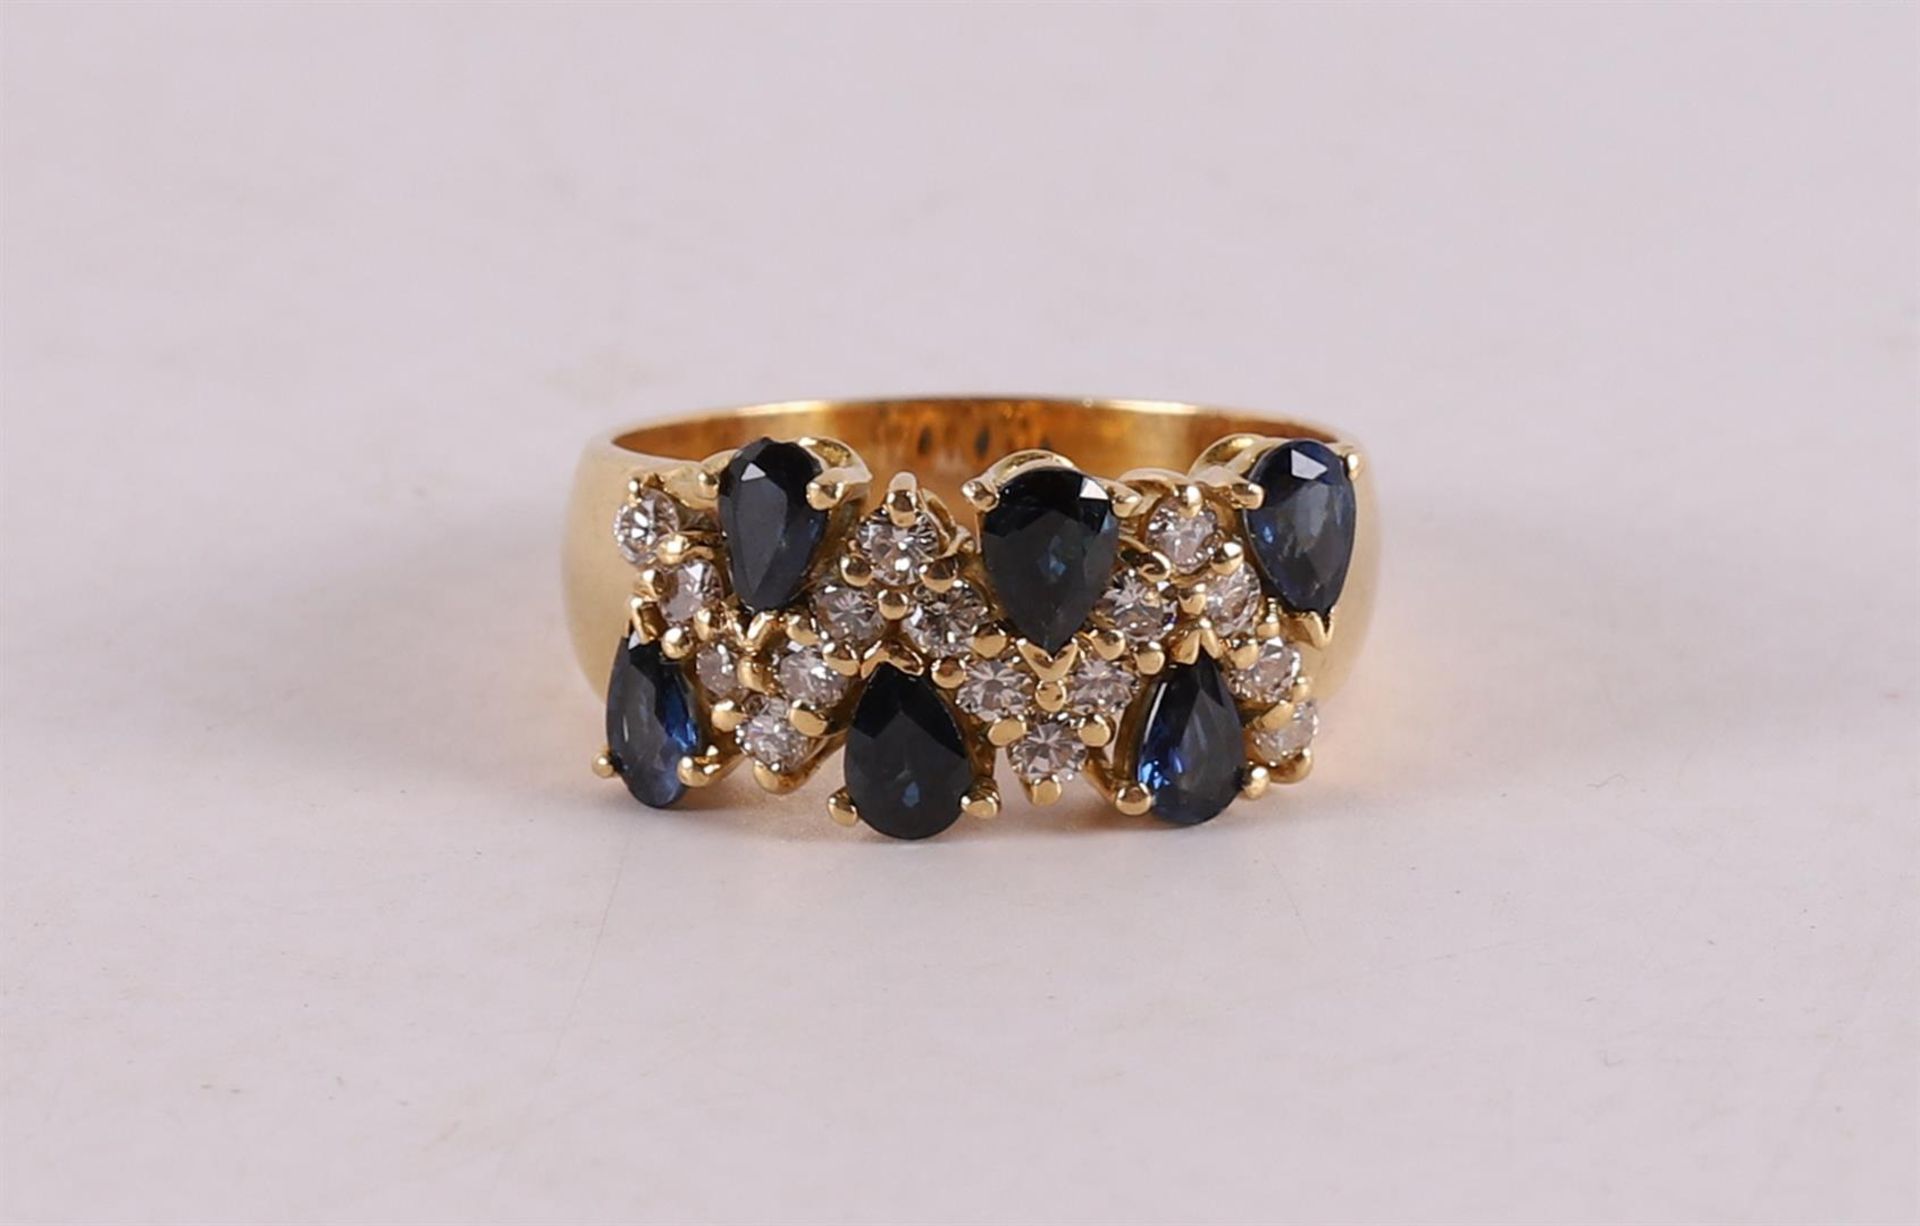 An 18 kt gold band ring with 6 blue sapphires and 16 diamonds